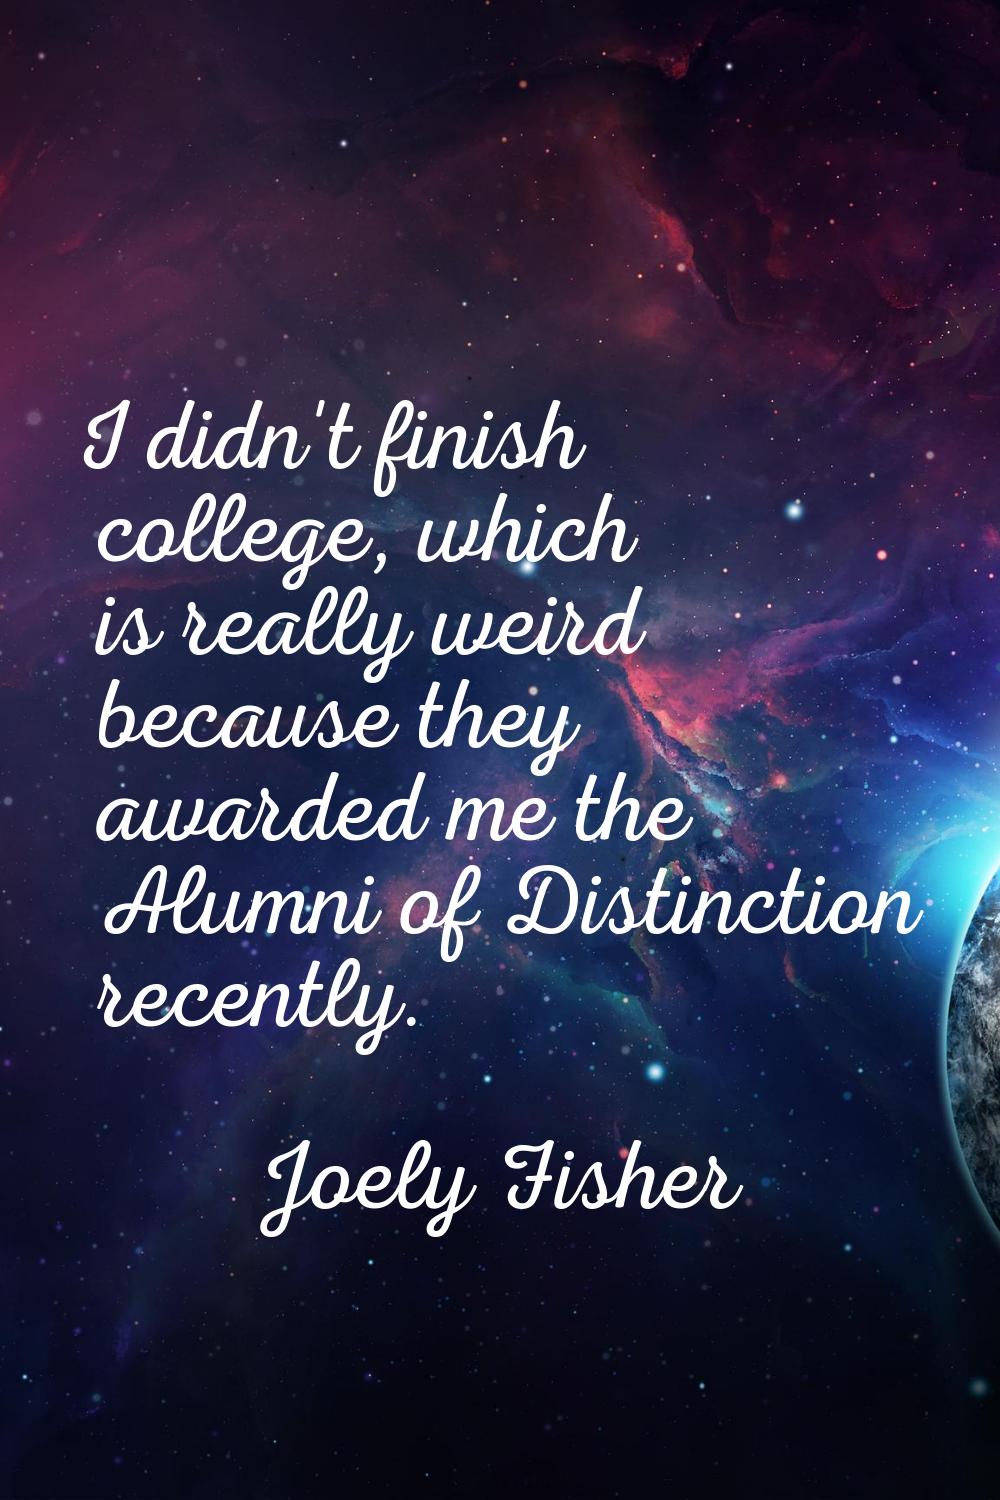 I didn't finish college, which is really weird because they awarded me the Alumni of Distinction re